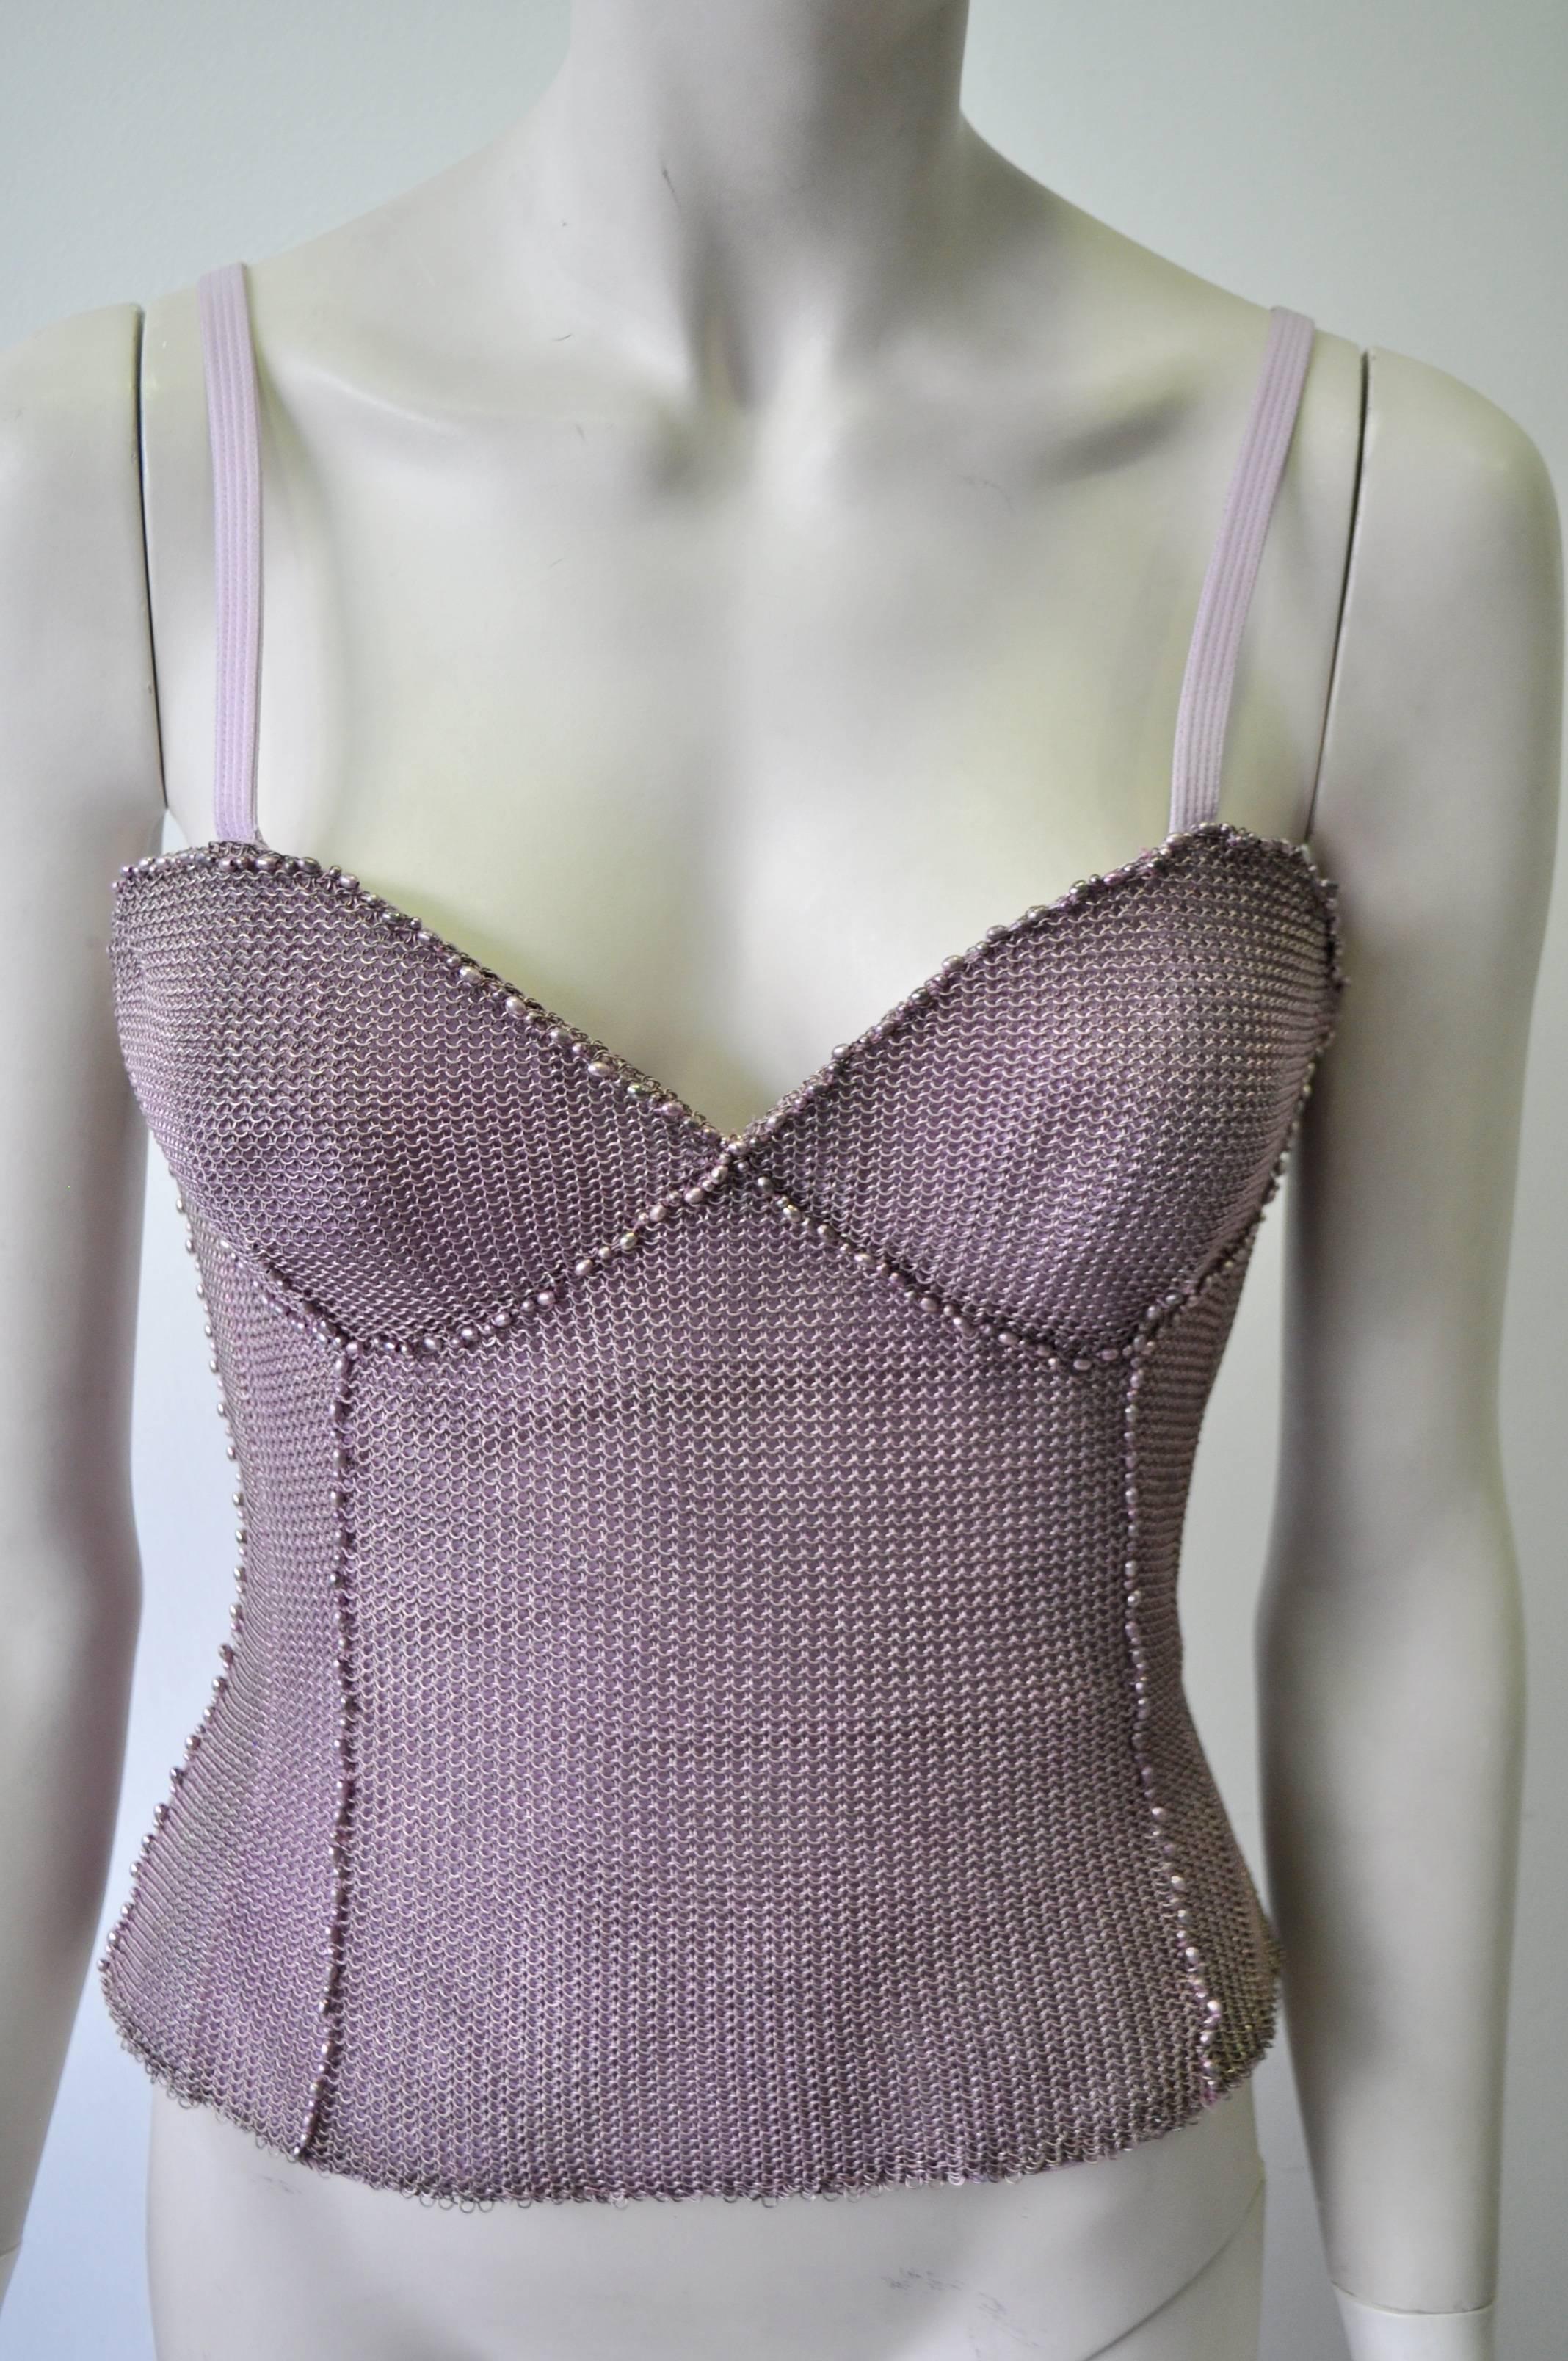 Exceptional Museum Quality Atelier Versace 100% Silk Chainmail Metal Hand Beaded Bodice Top, Spring 1992 (widely considered the height of Versace's designing prowess)